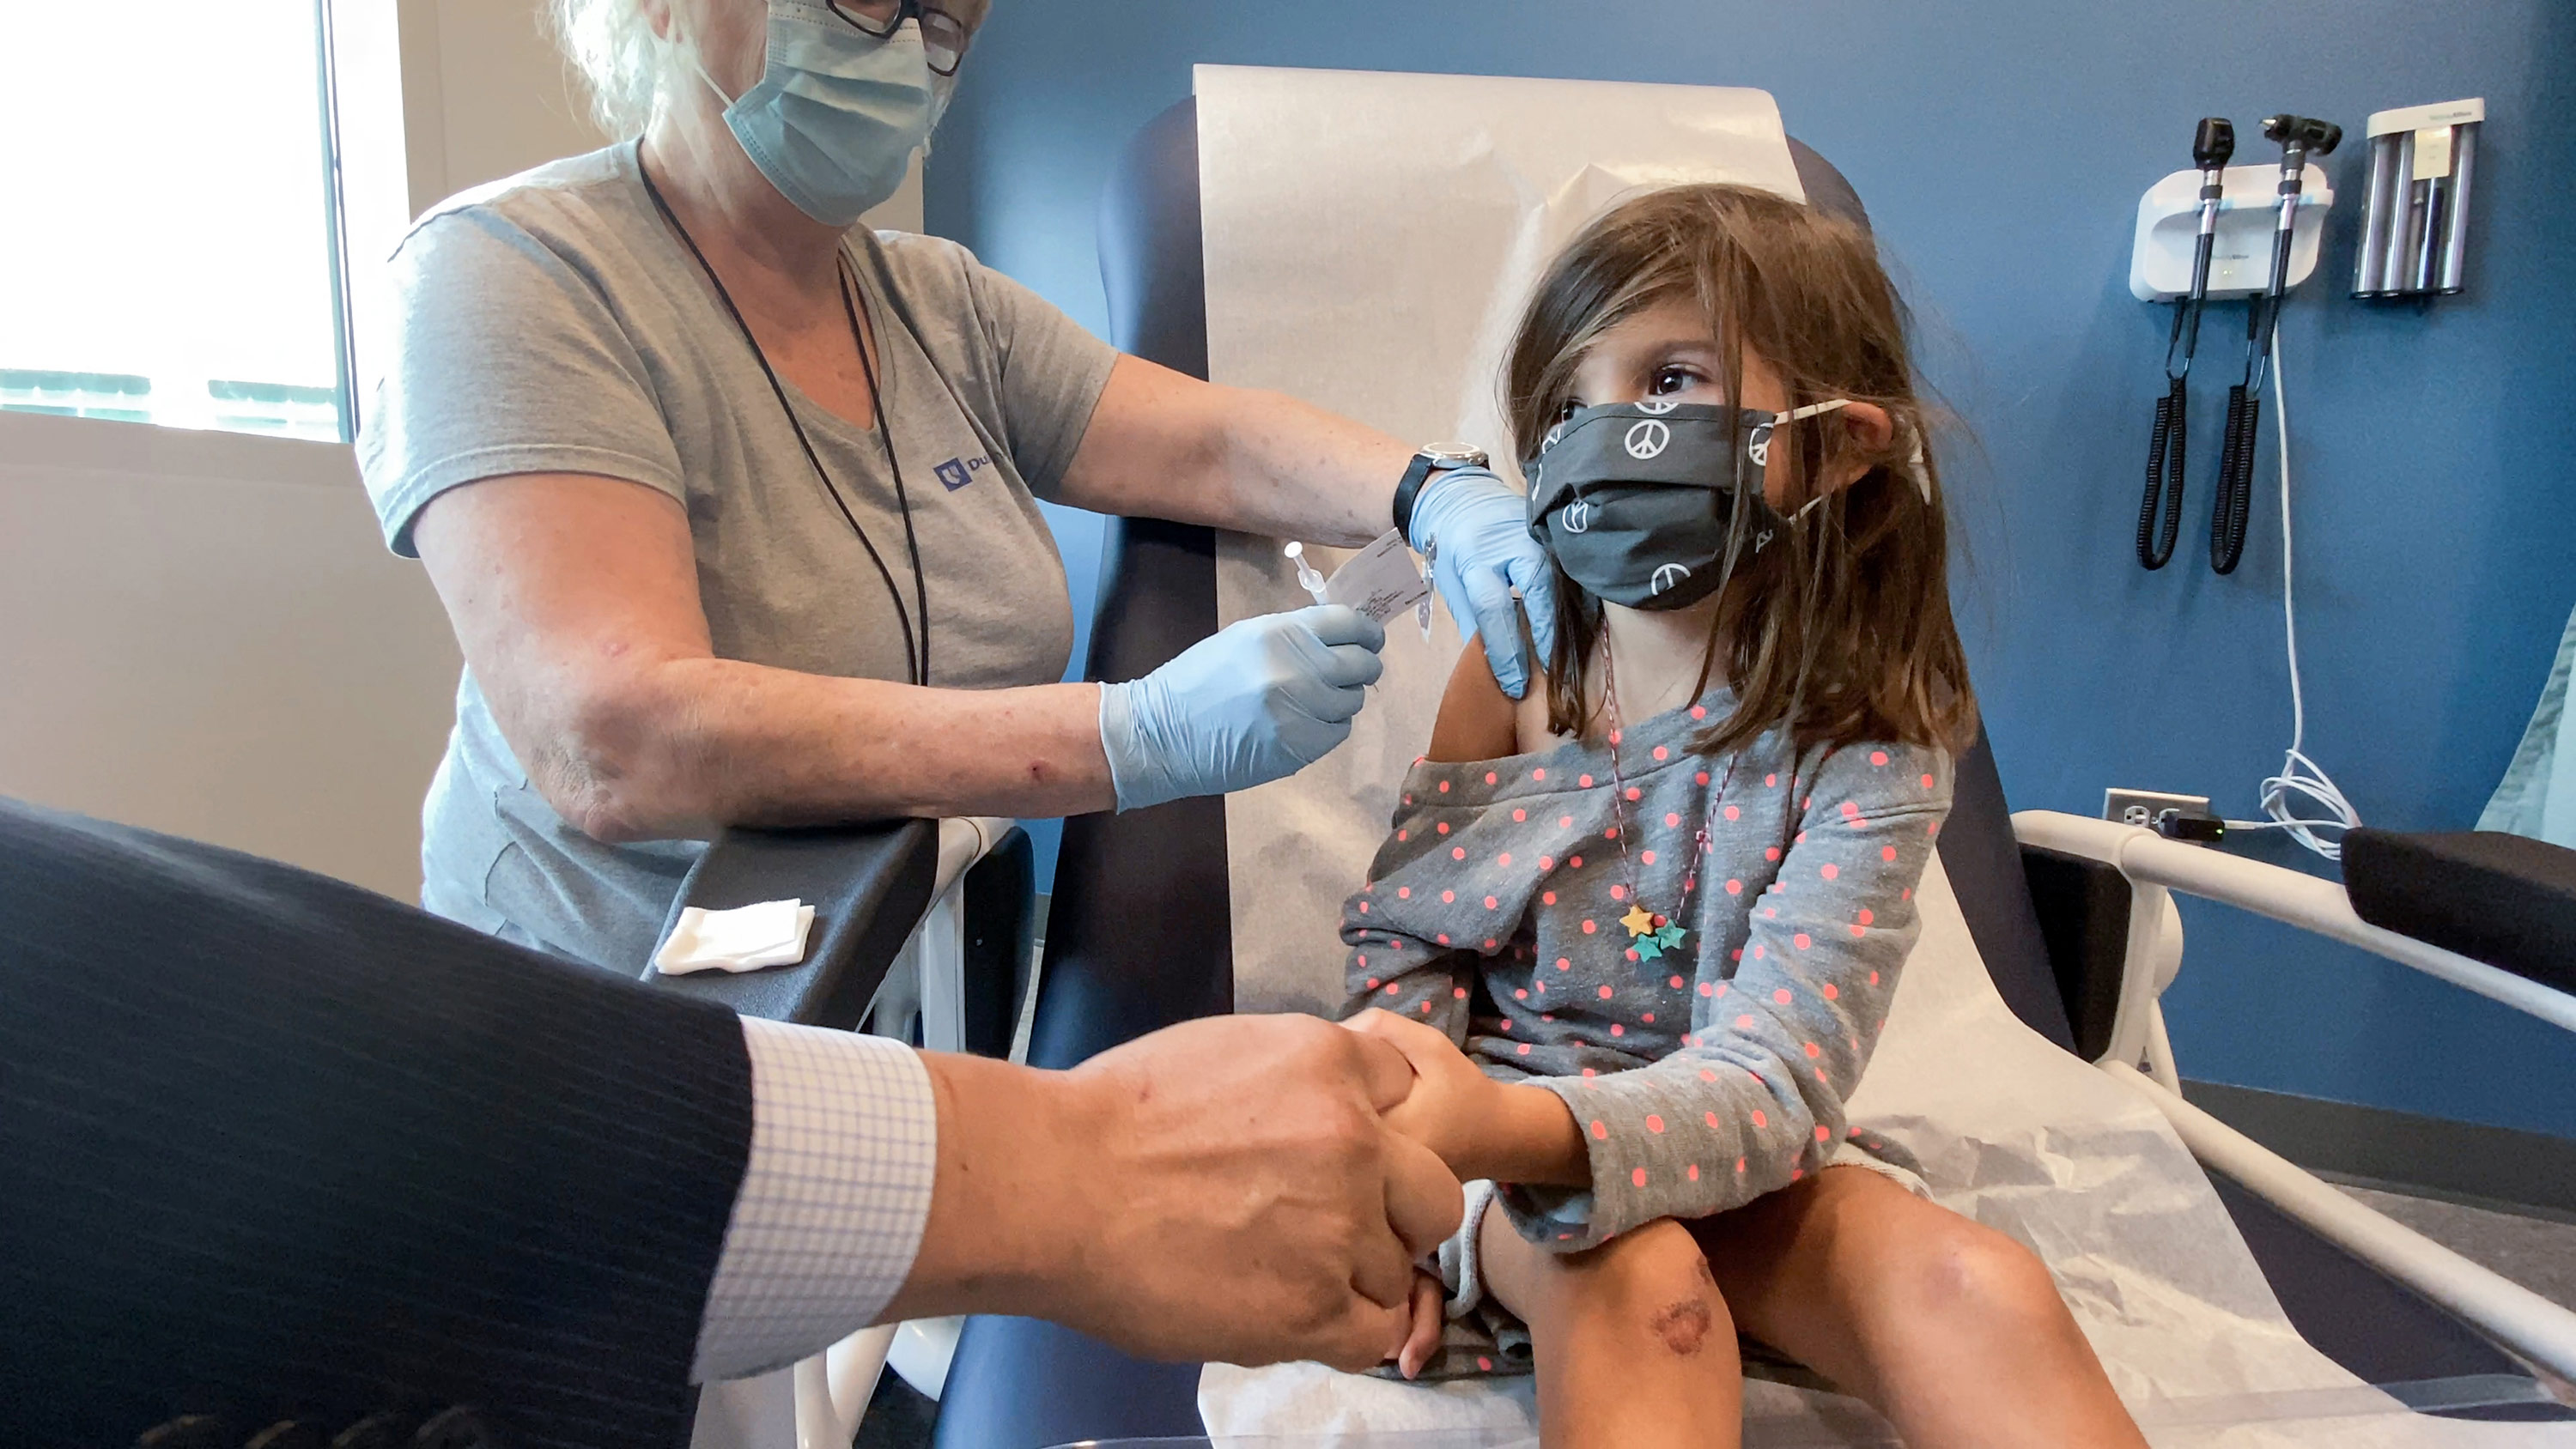 Bridgette Melo, 5, holds onto the hand of her dad Jim Melo as she gets the first of two Pfizer COVID vaccinations on September 28 during a clinical trial for children at Duke Health.